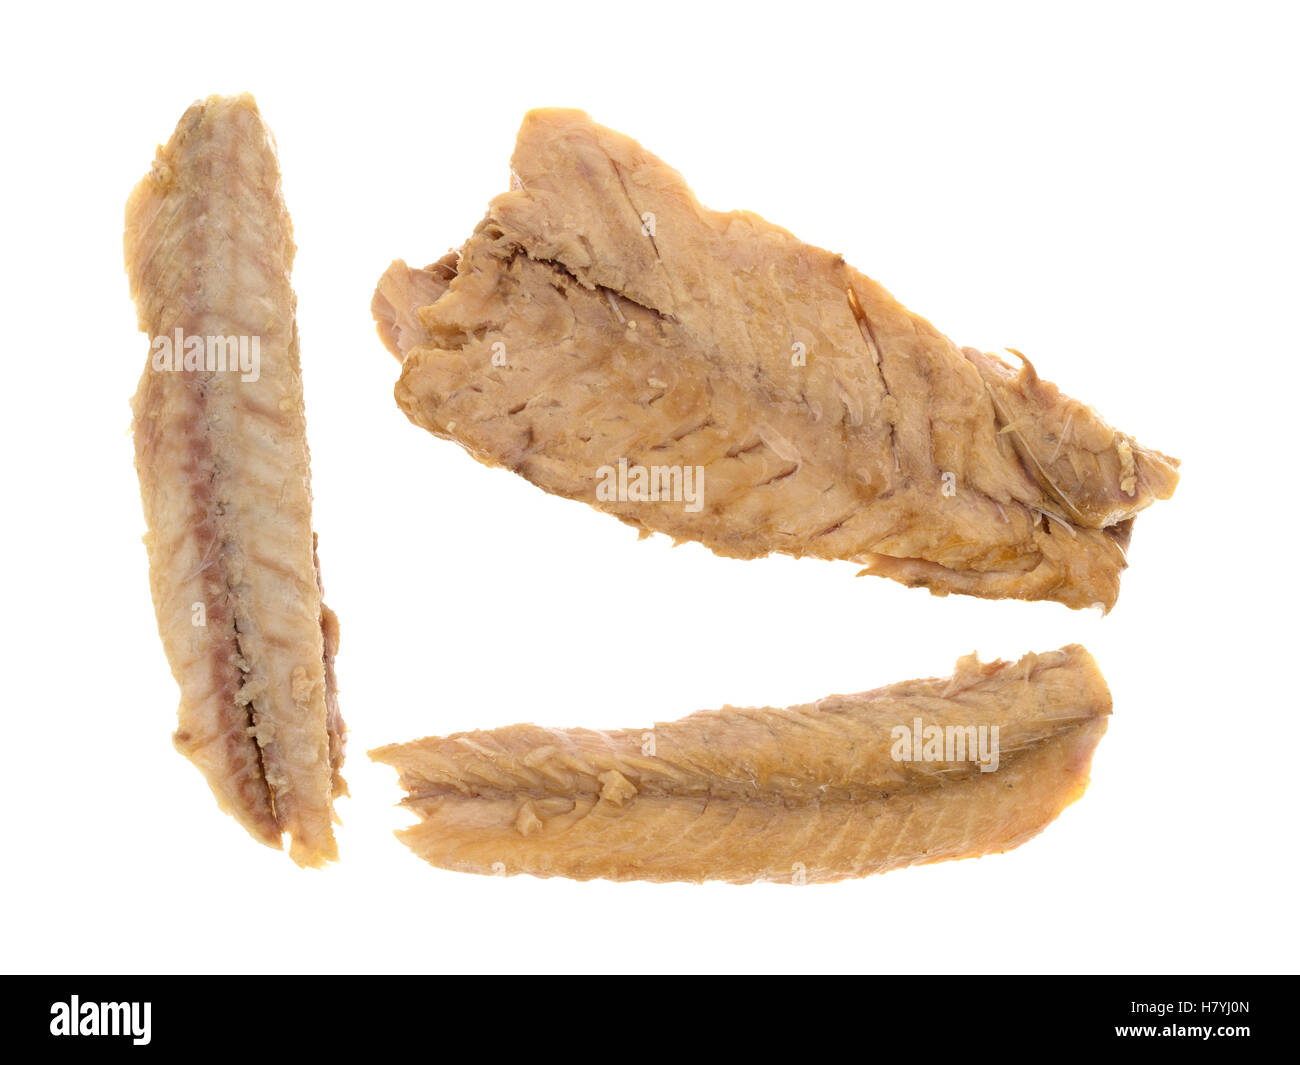 Top view of skinless mackerel fillets on a white background. Stock Photo